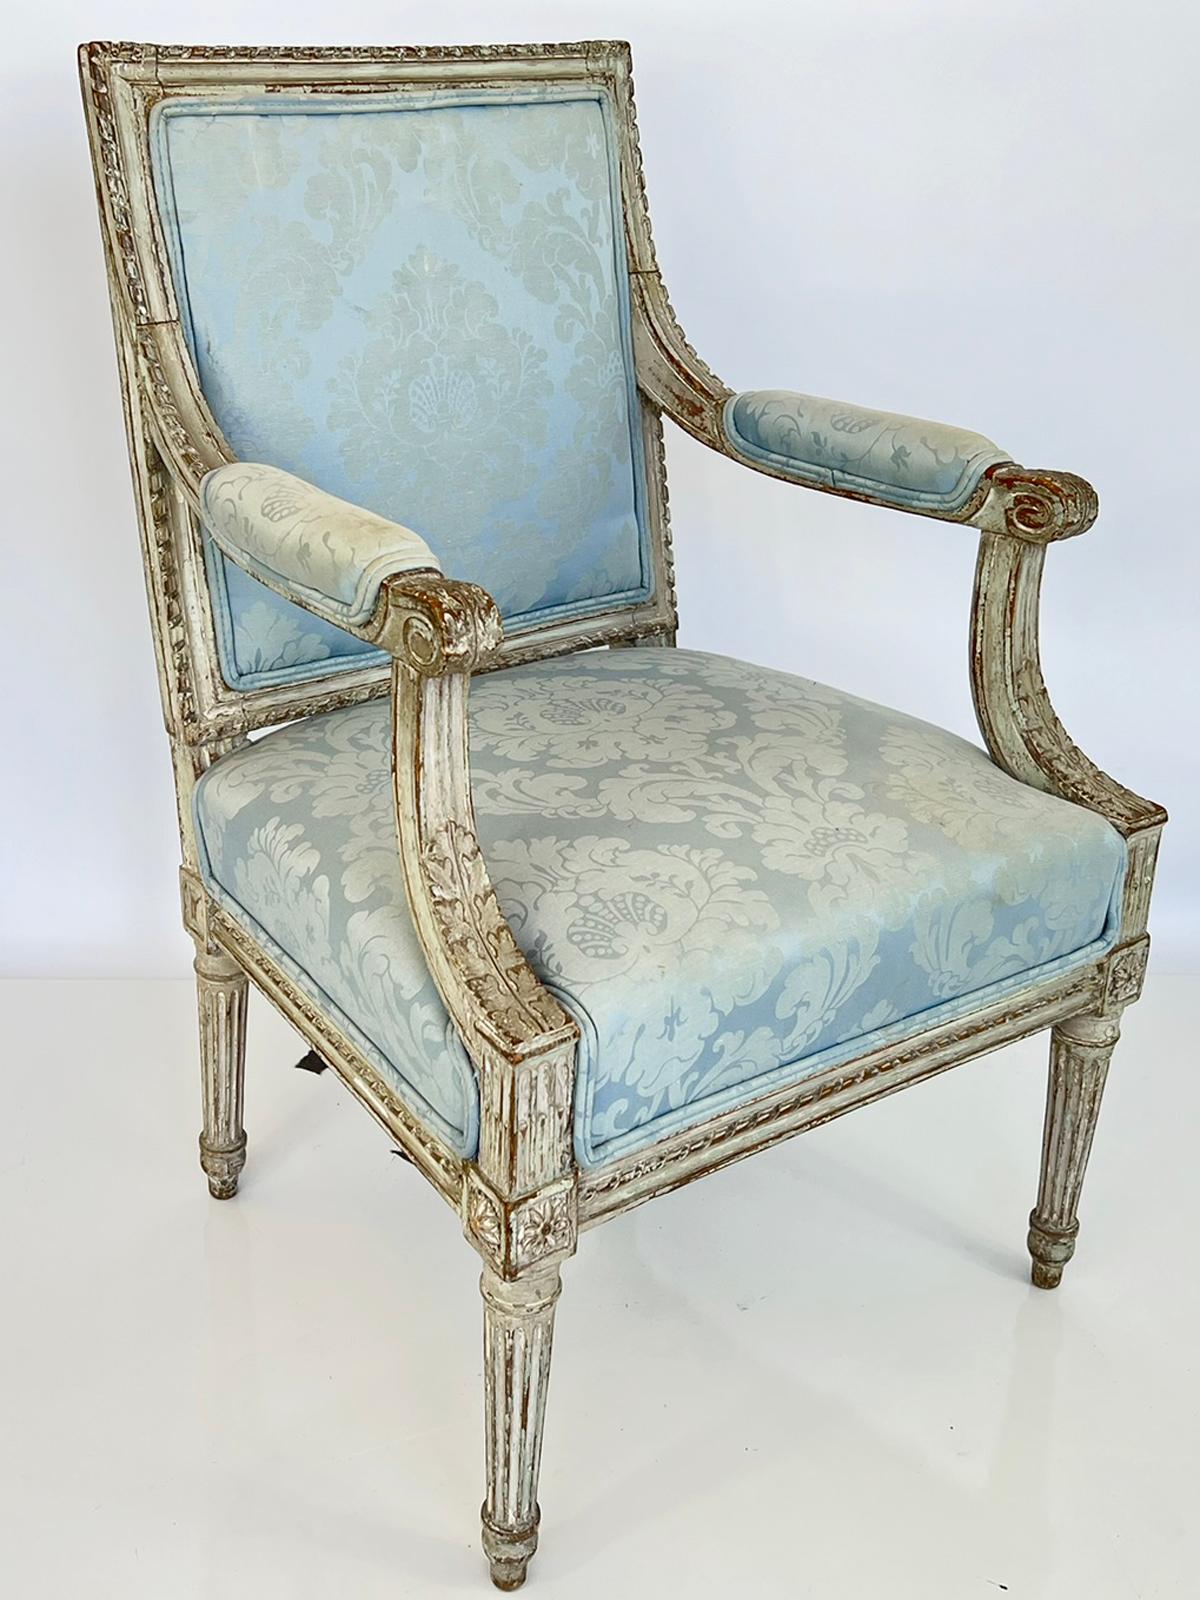 Upholstery Pair of 18th/19th Century French Carved Fauteuils For Sale